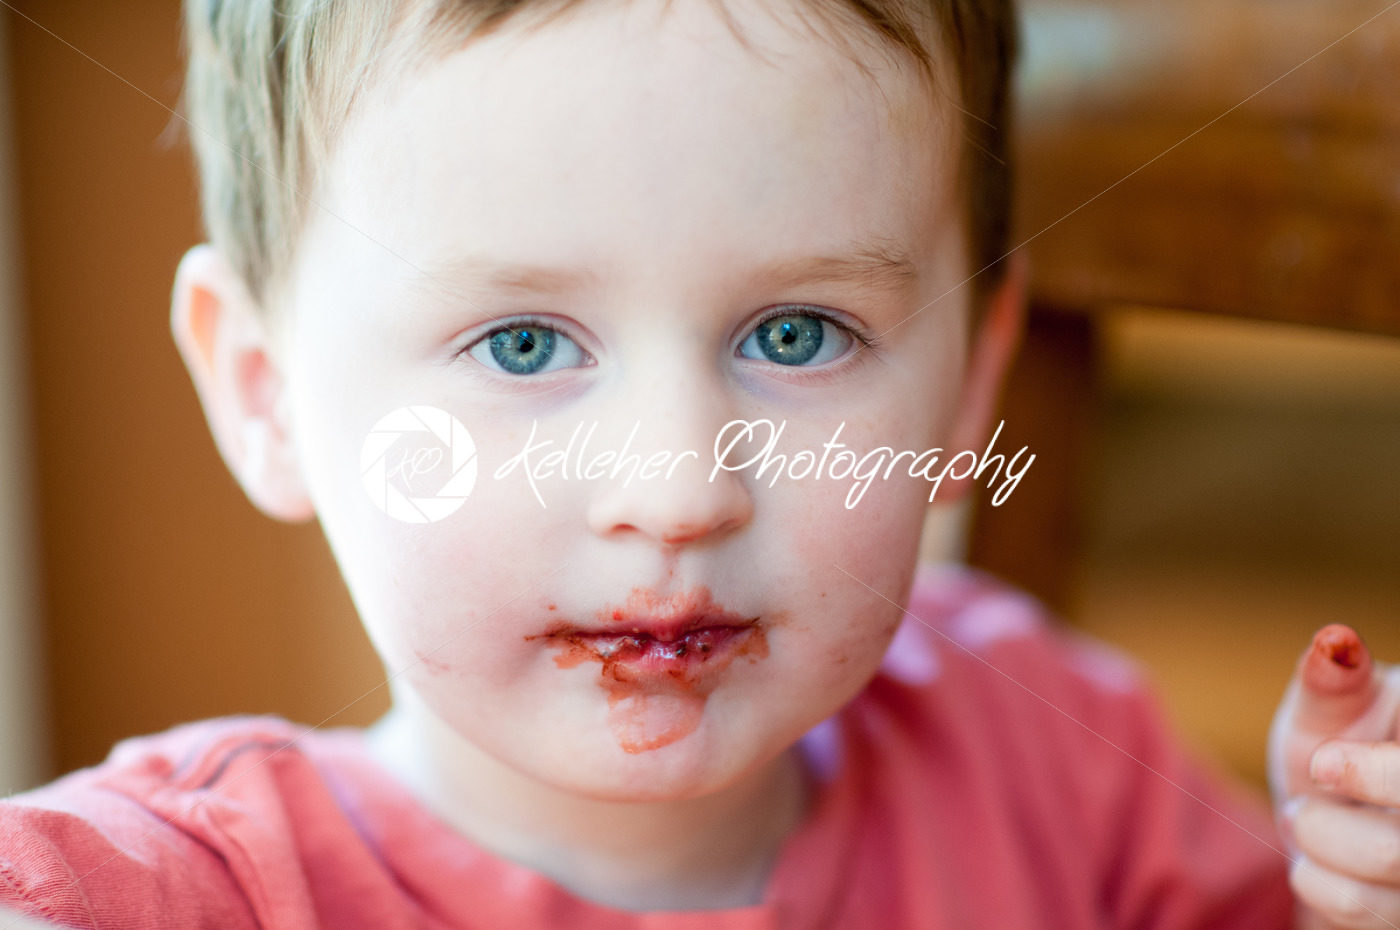 Little boy eating chocolate covered strawberries - Kelleher Photography Store